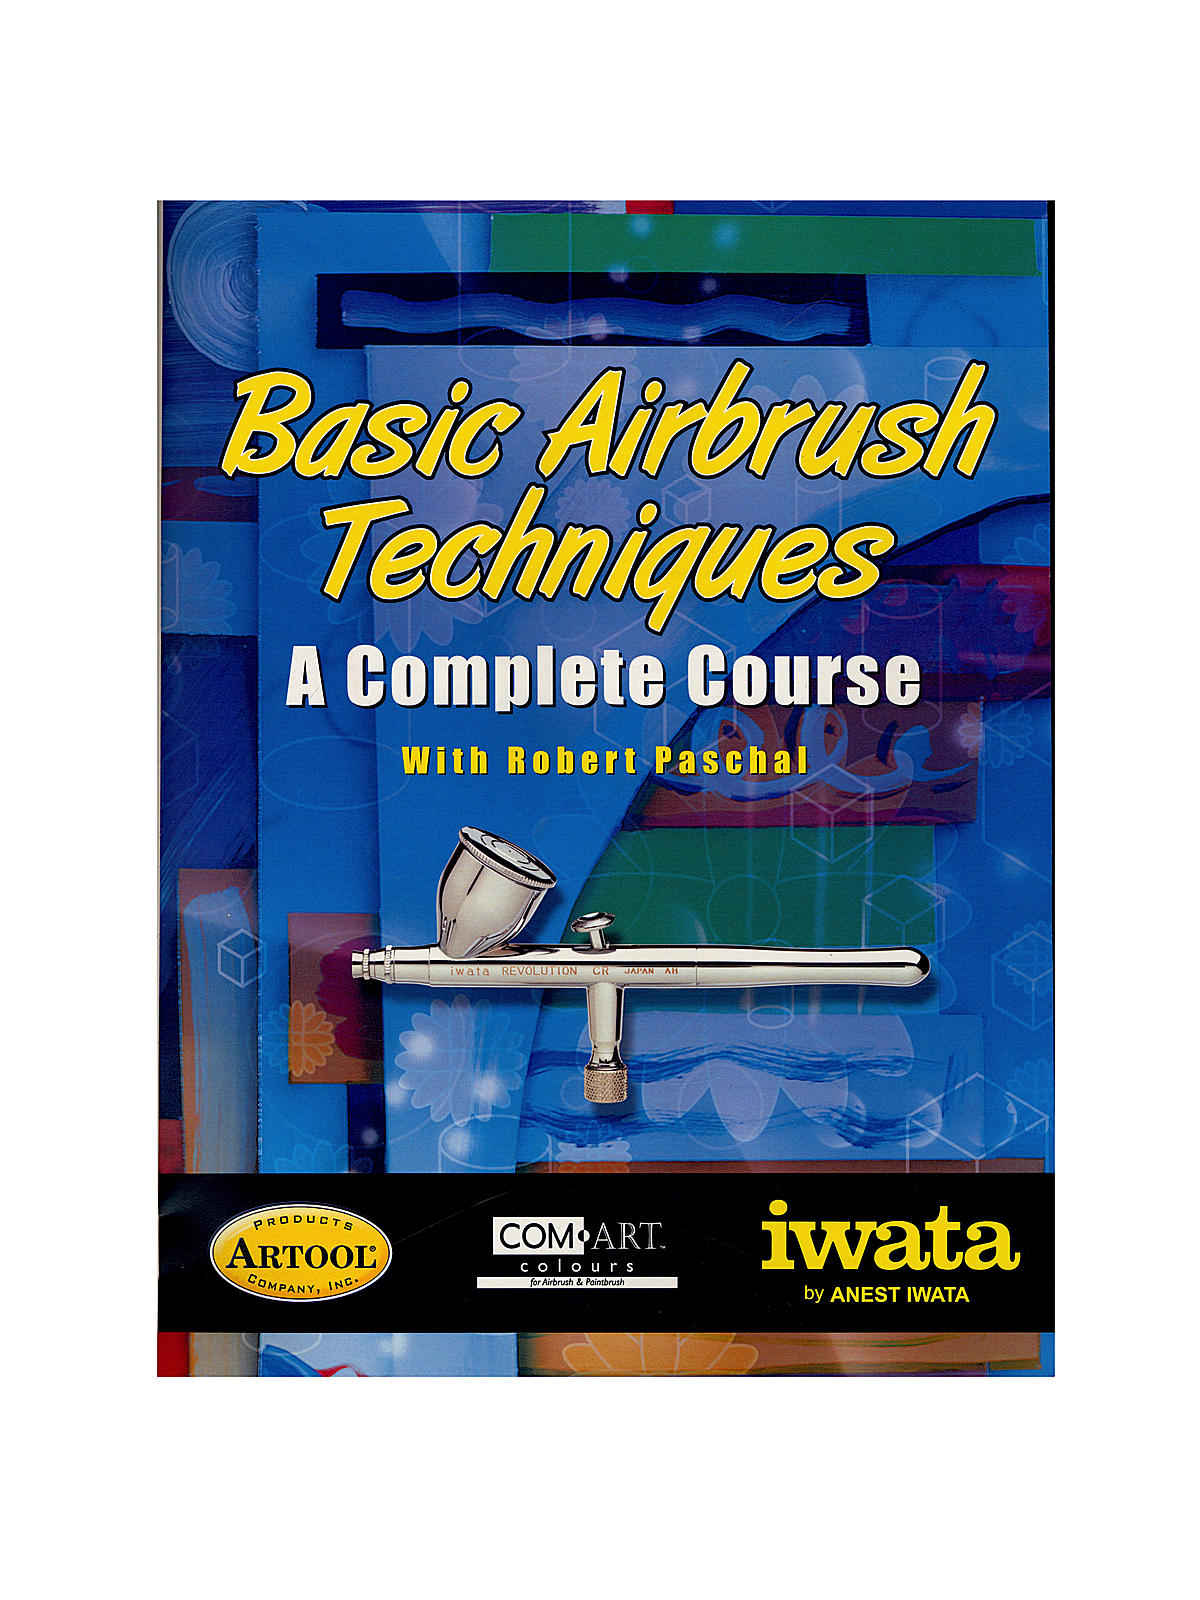 Basic Airbrush Techniques - A Complete Course Each